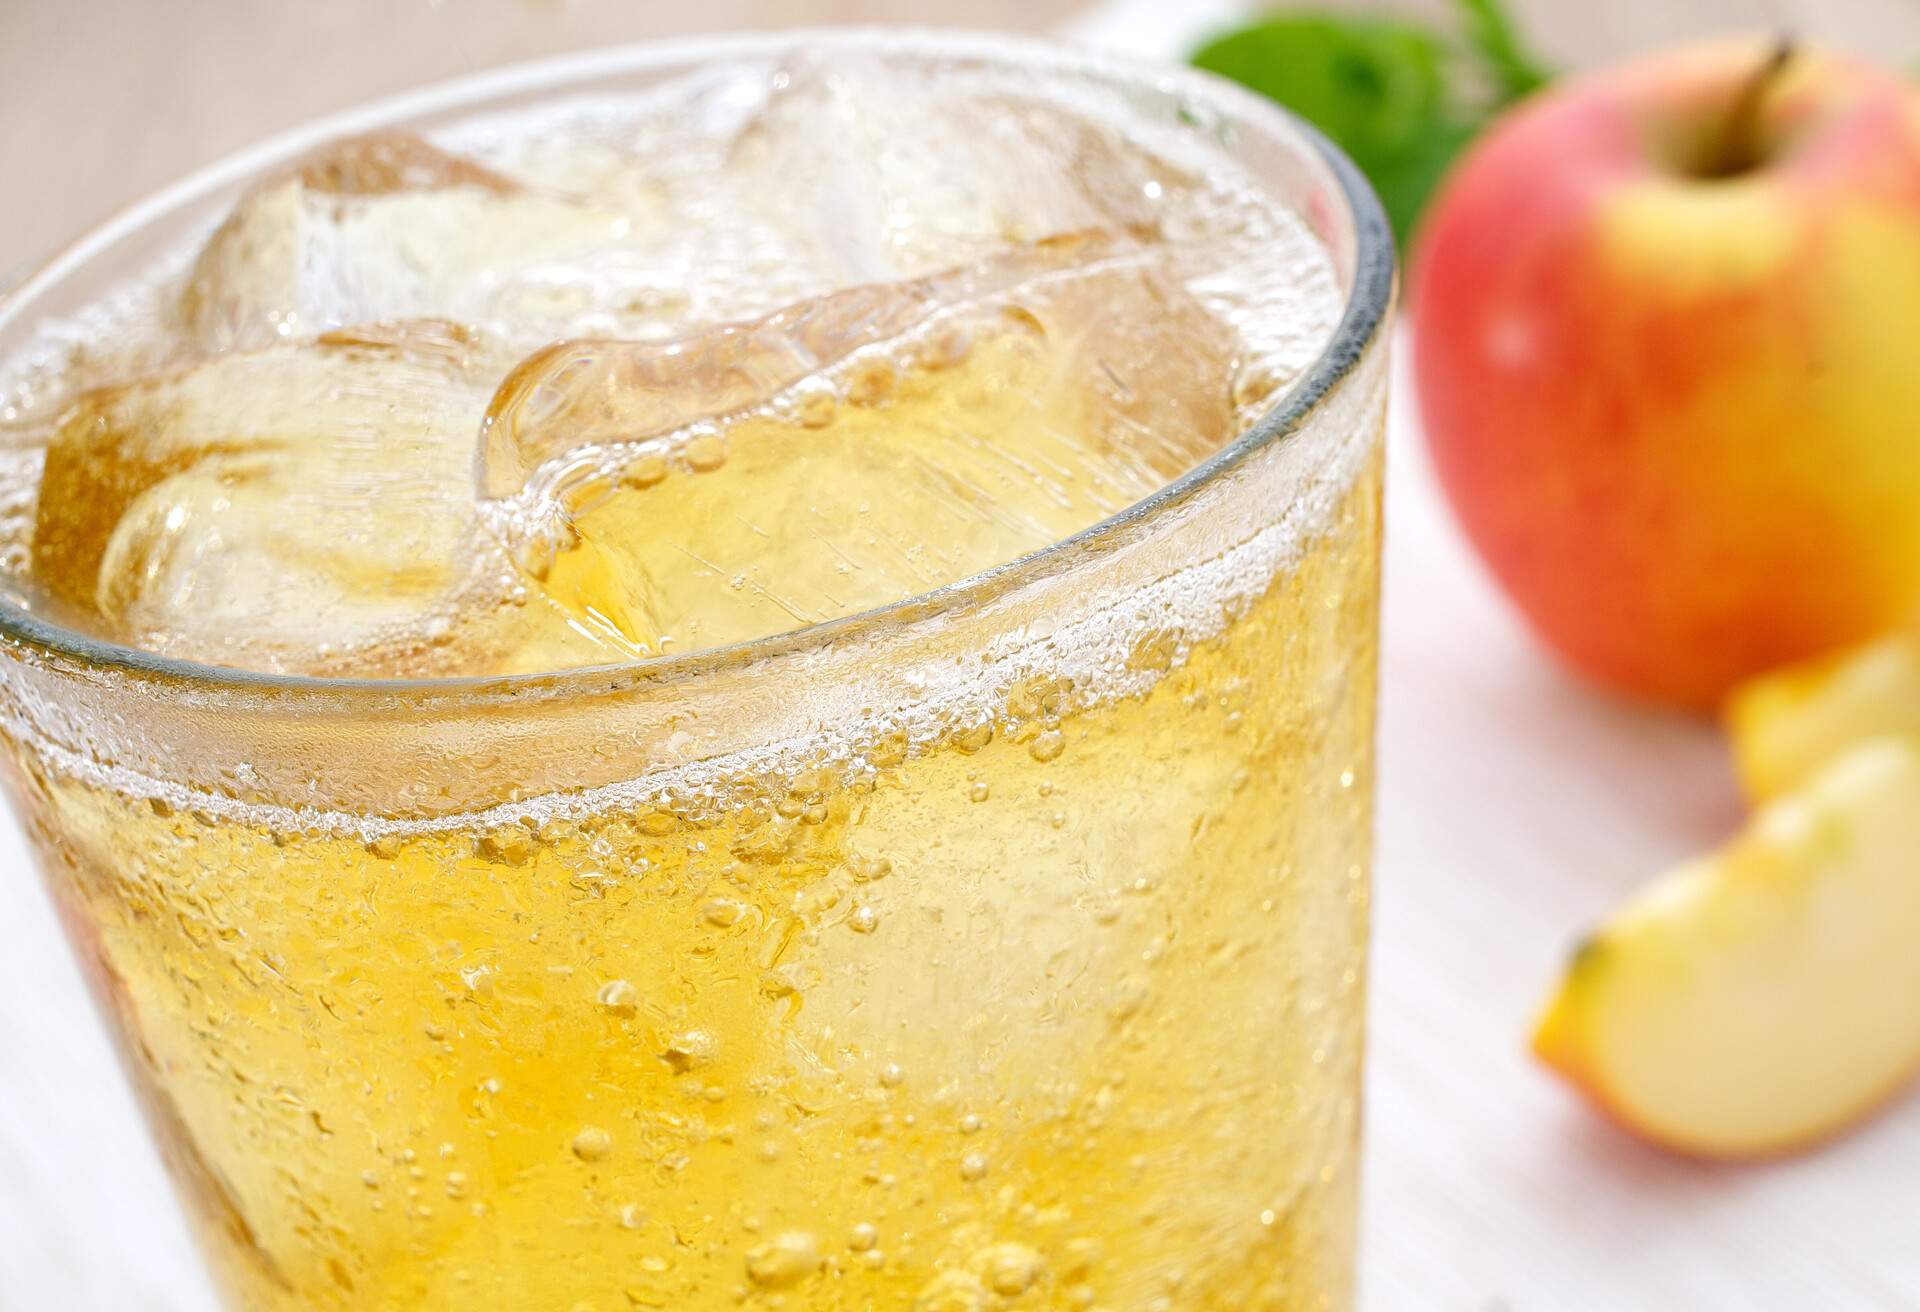 A glass of refreshing ice-cold apple juice spritzer apple spritzer with ice cubes. The cold glass has condensed water pots. In the background is an apple and sliced apple slices.